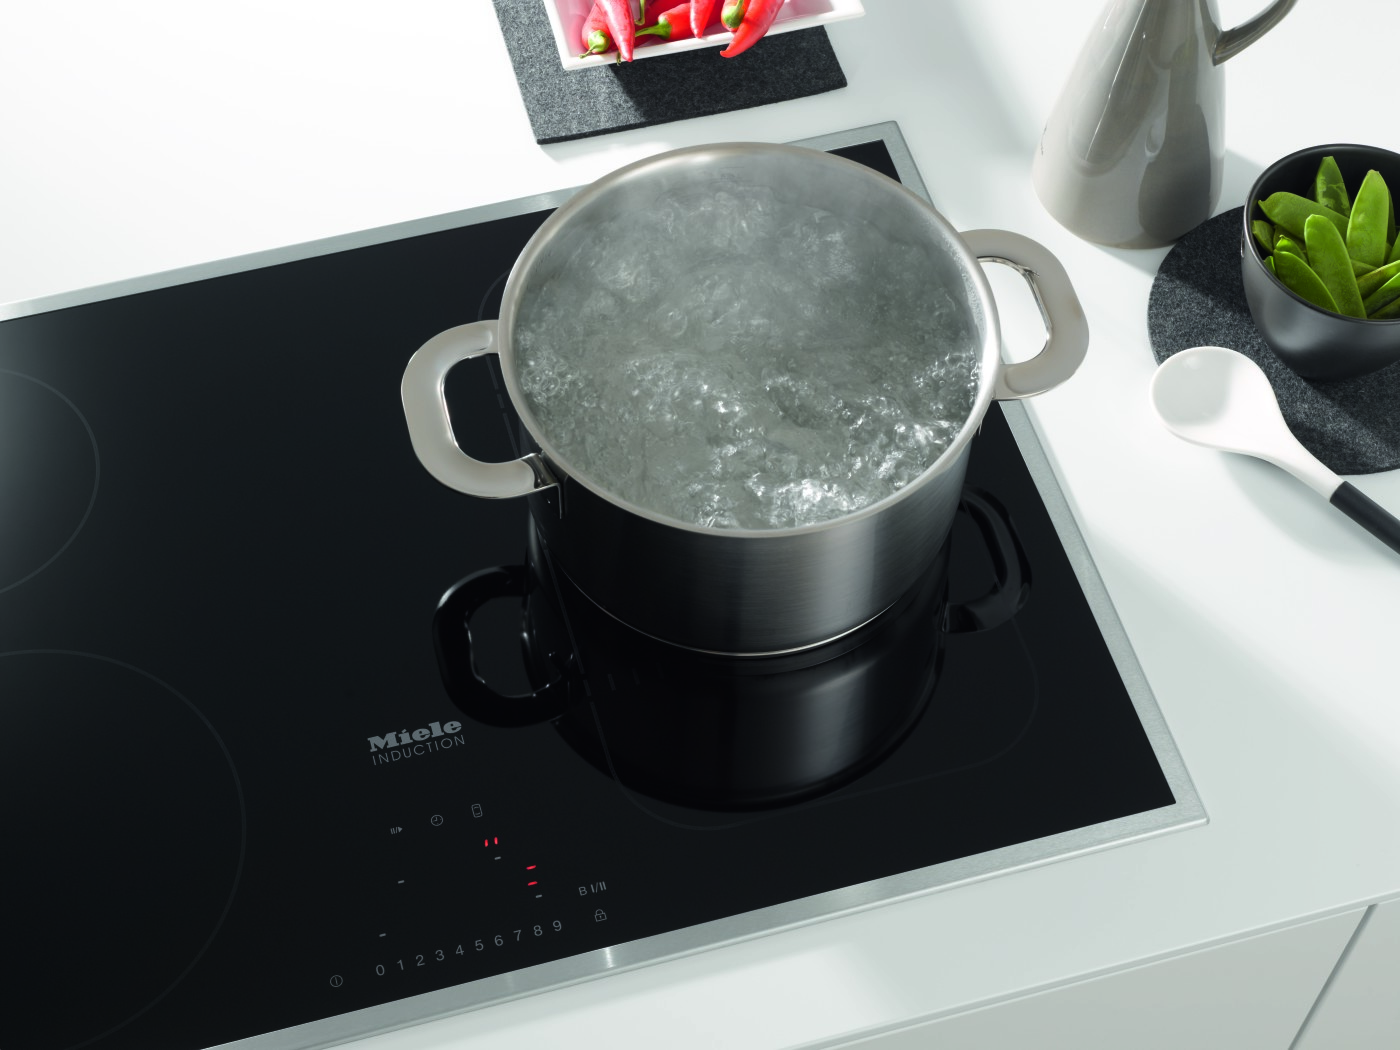 i/products/Product Category Page/Hobs & Combisets/Induction/Efficient and Safe.jpg